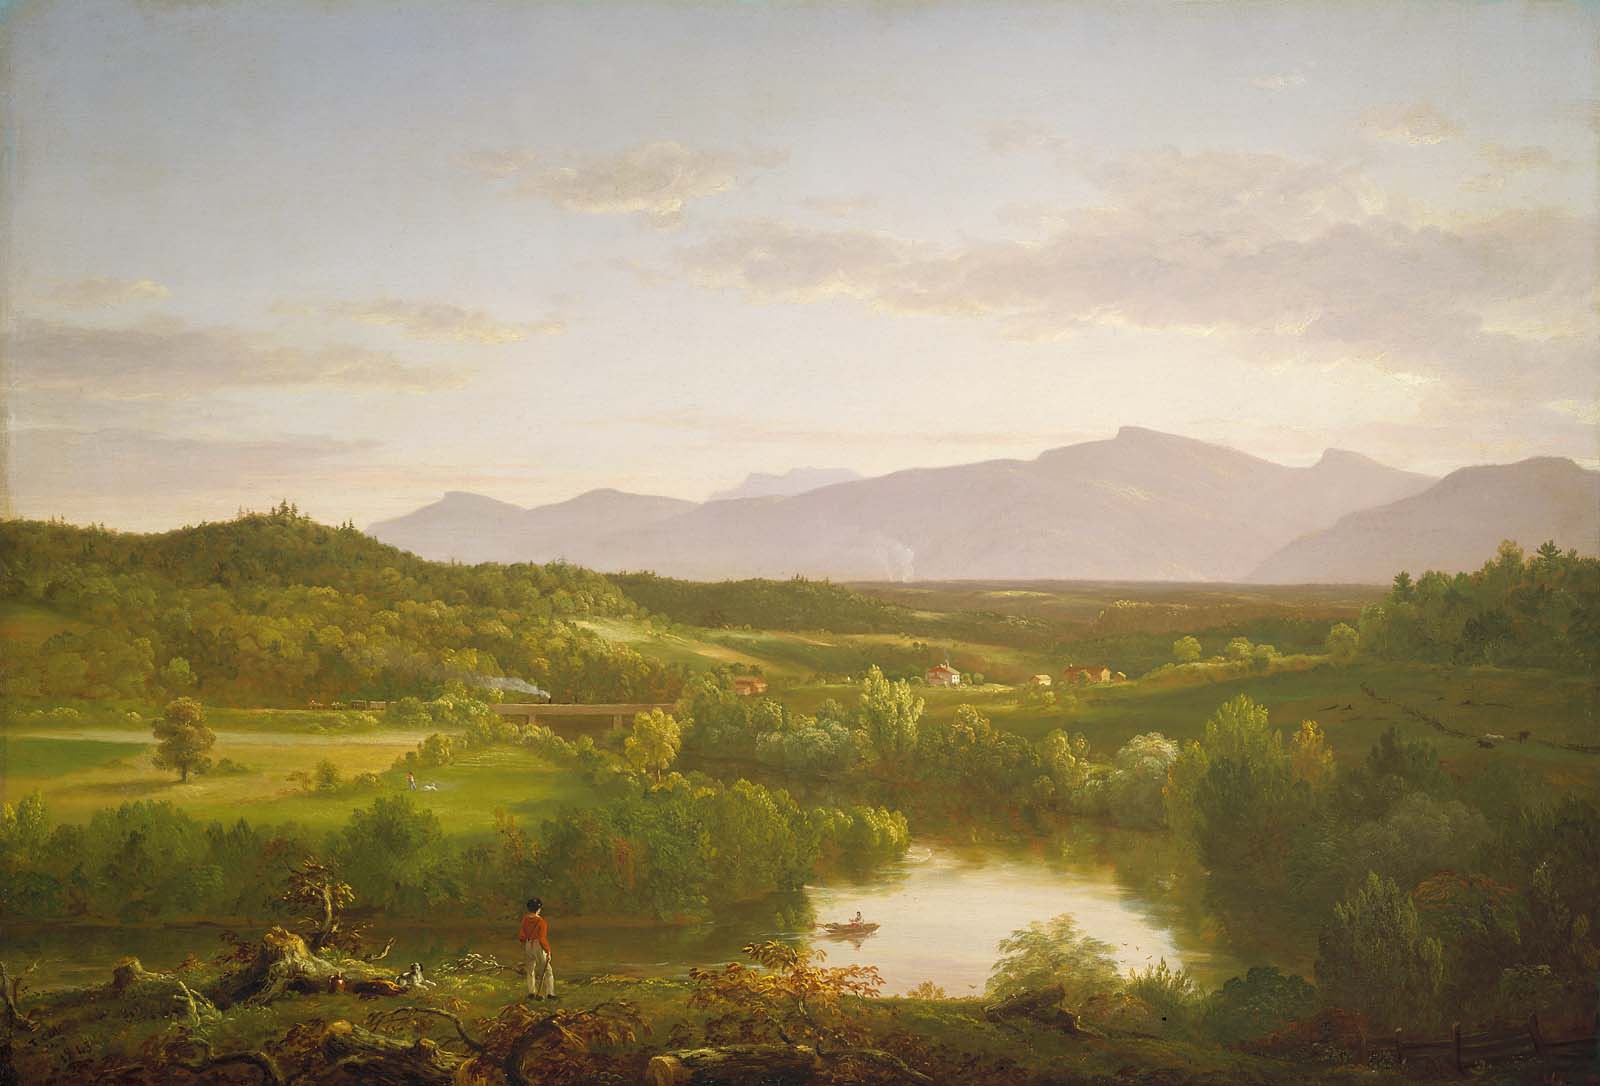 River in the Catskills, 1843, Thomas Cole (American, b. England, 1801-1848)